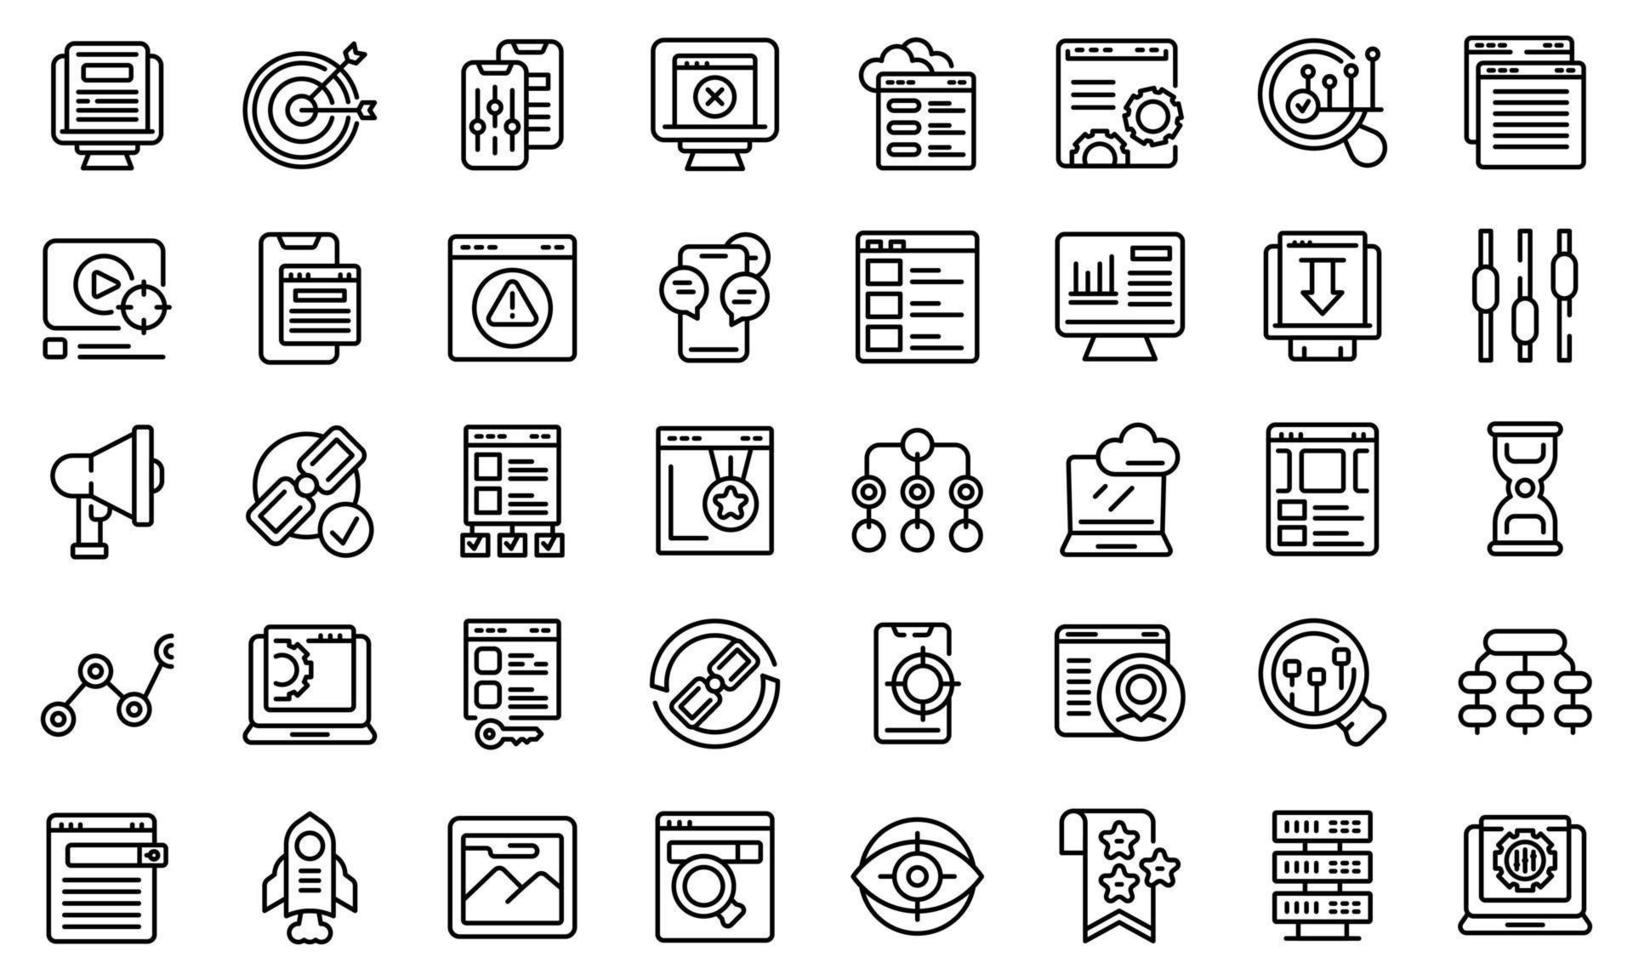 Search engine optimization icons set, outline style vector